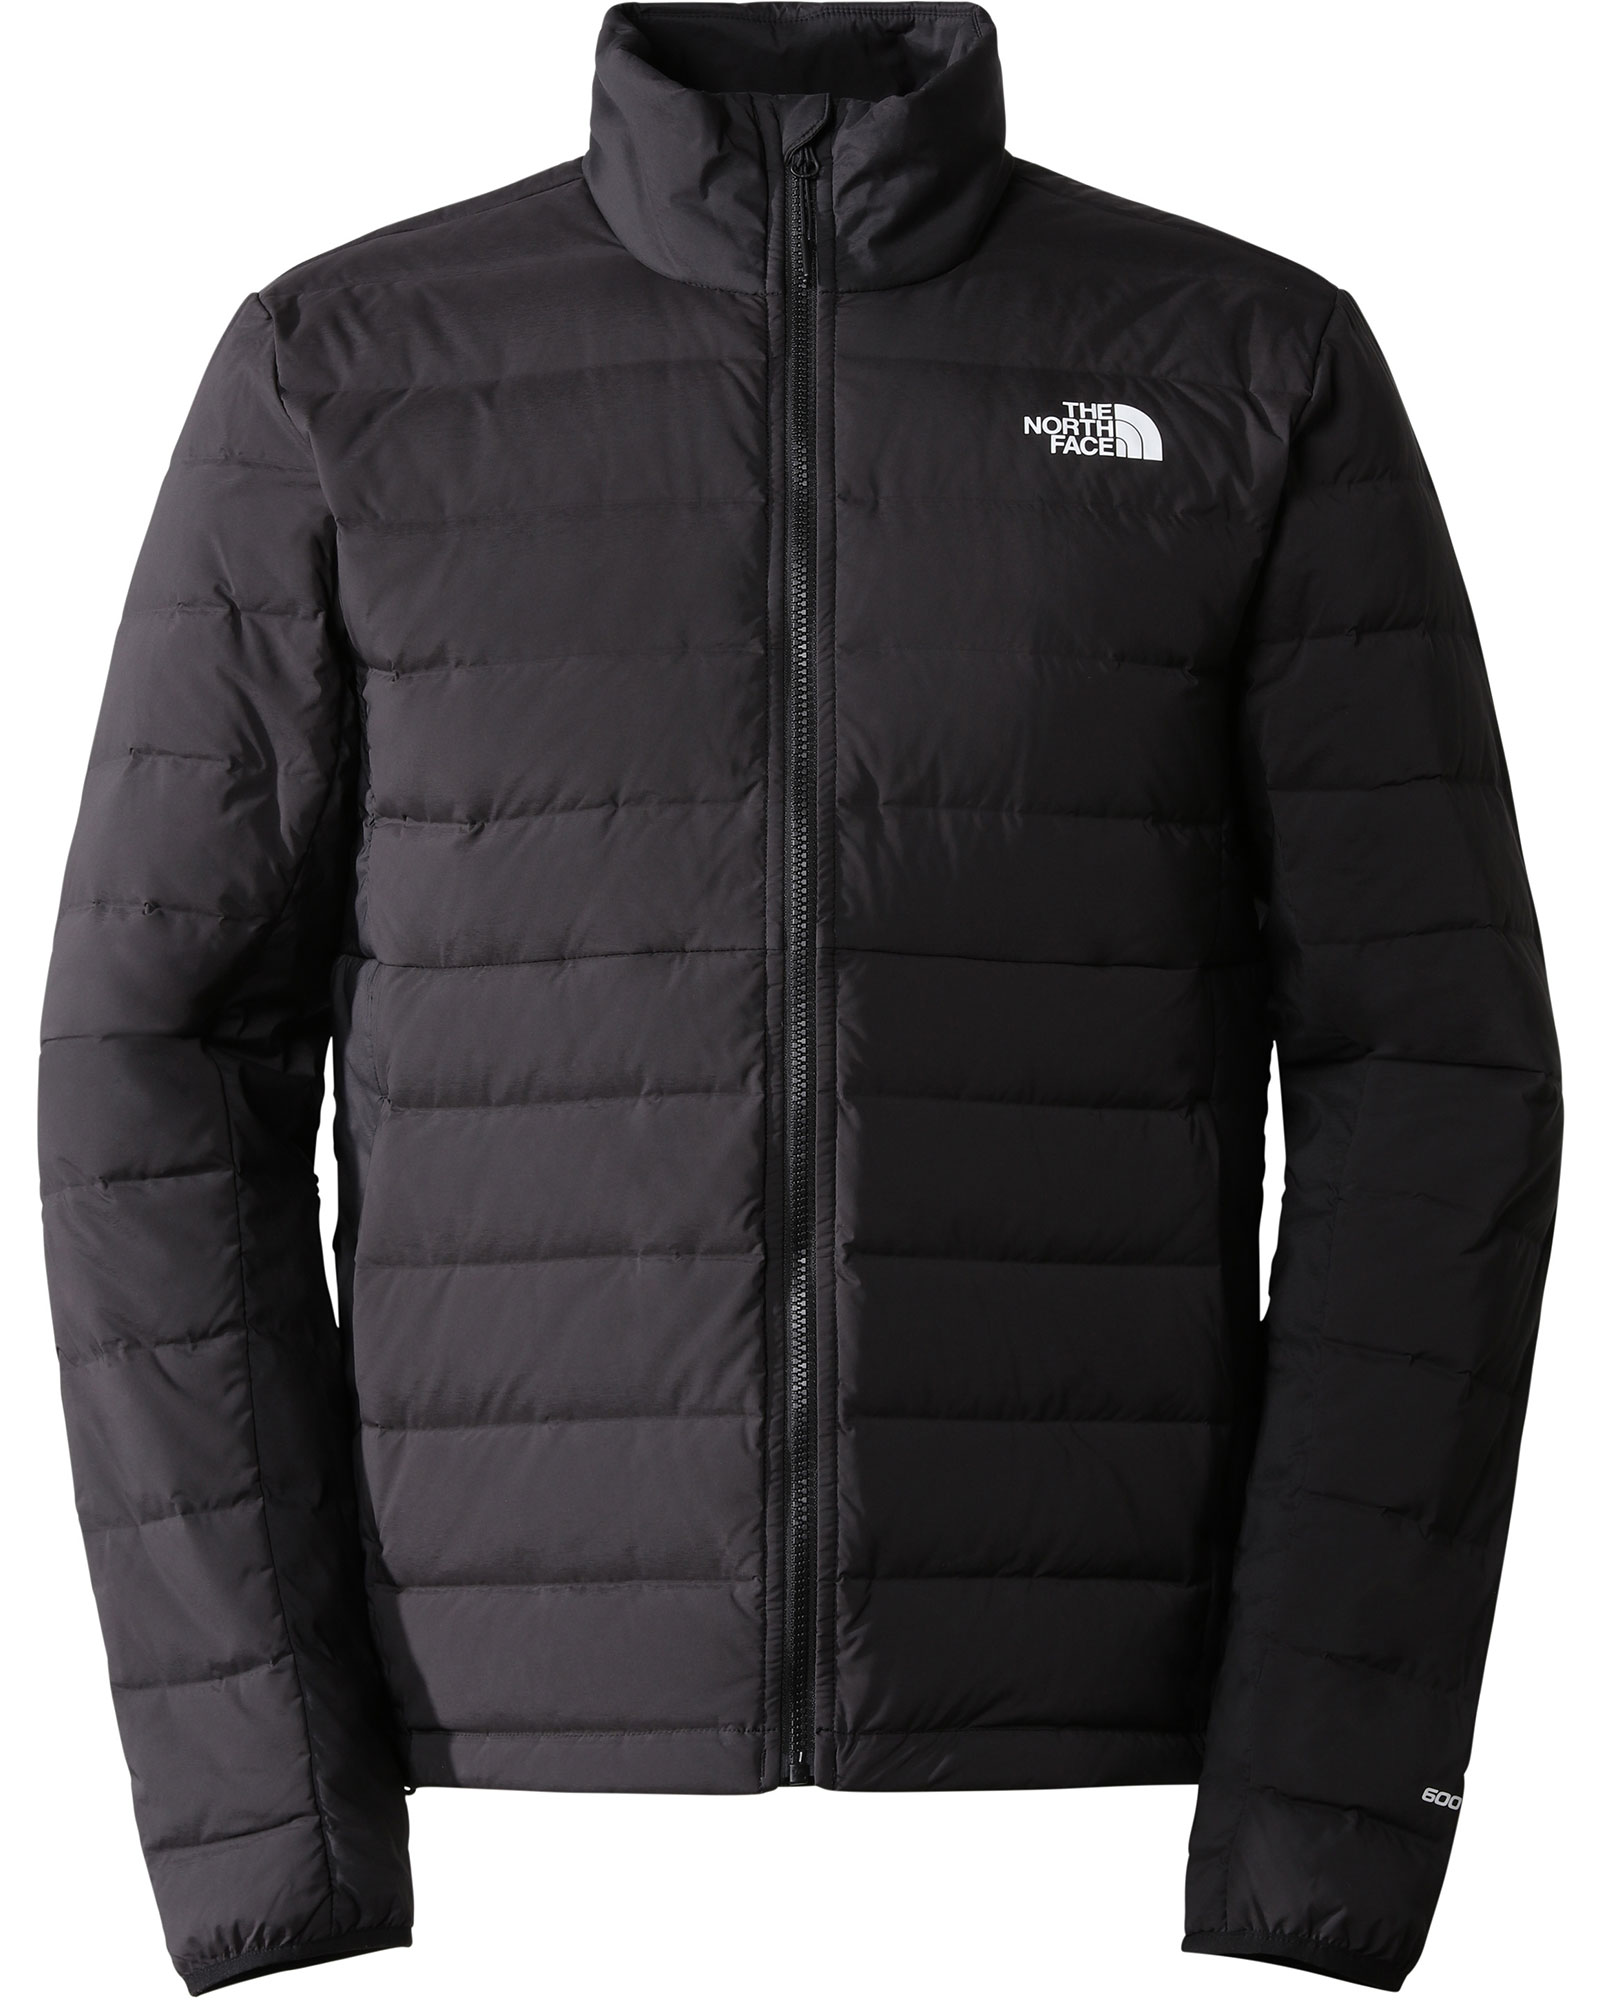 The North Face Belleview Stretch Down Men’s Jacket - TNF Black S